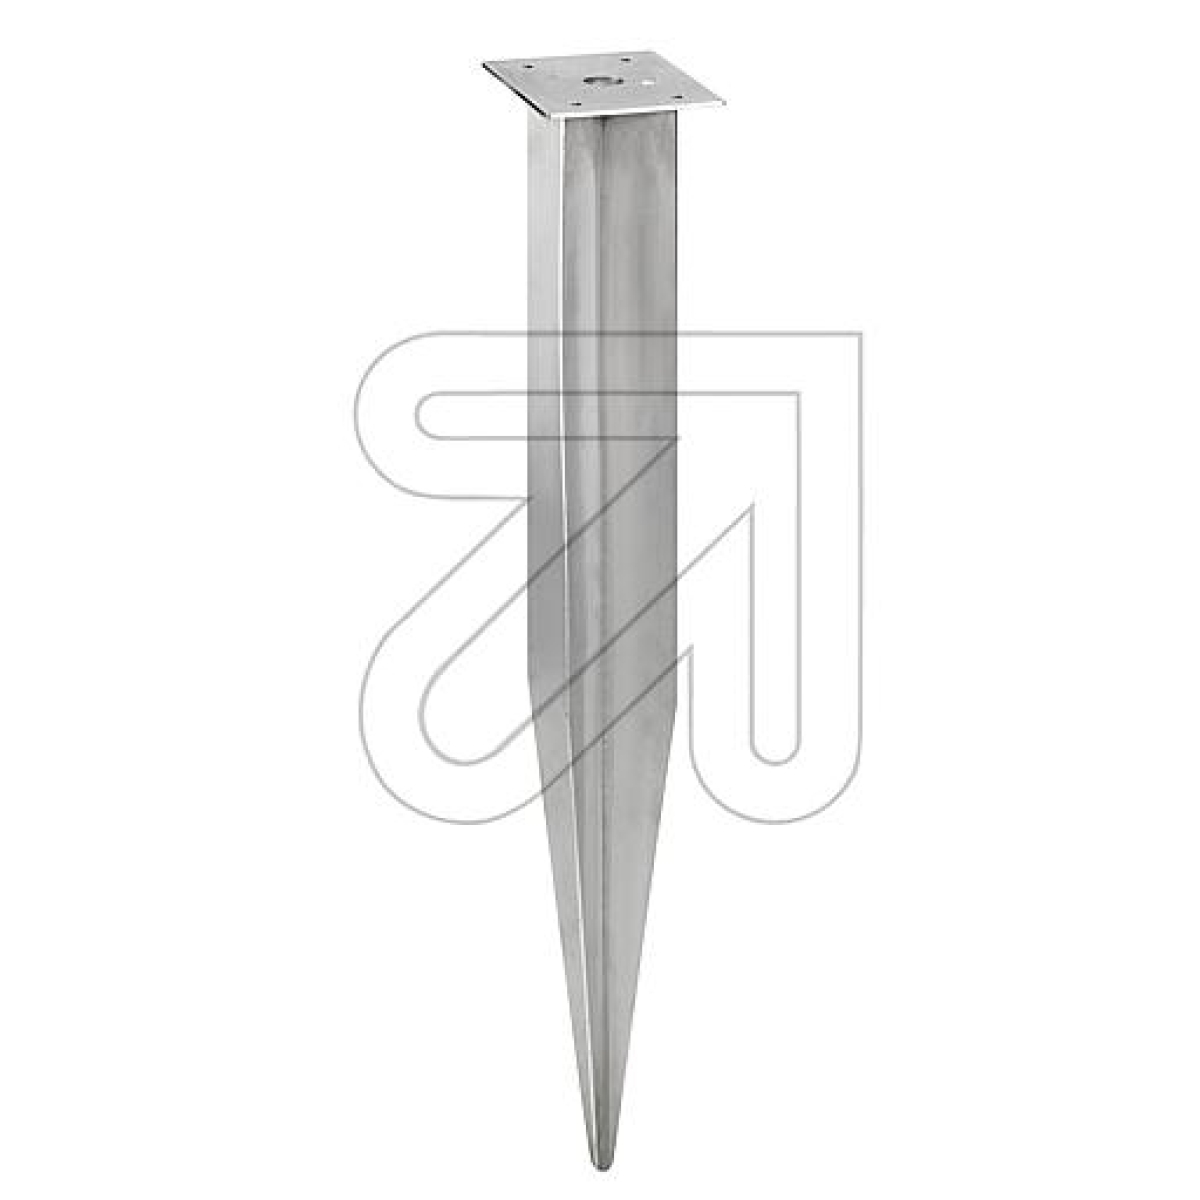 LCDGround spike stainless steel H300 097E for 626770Article-No: 627430